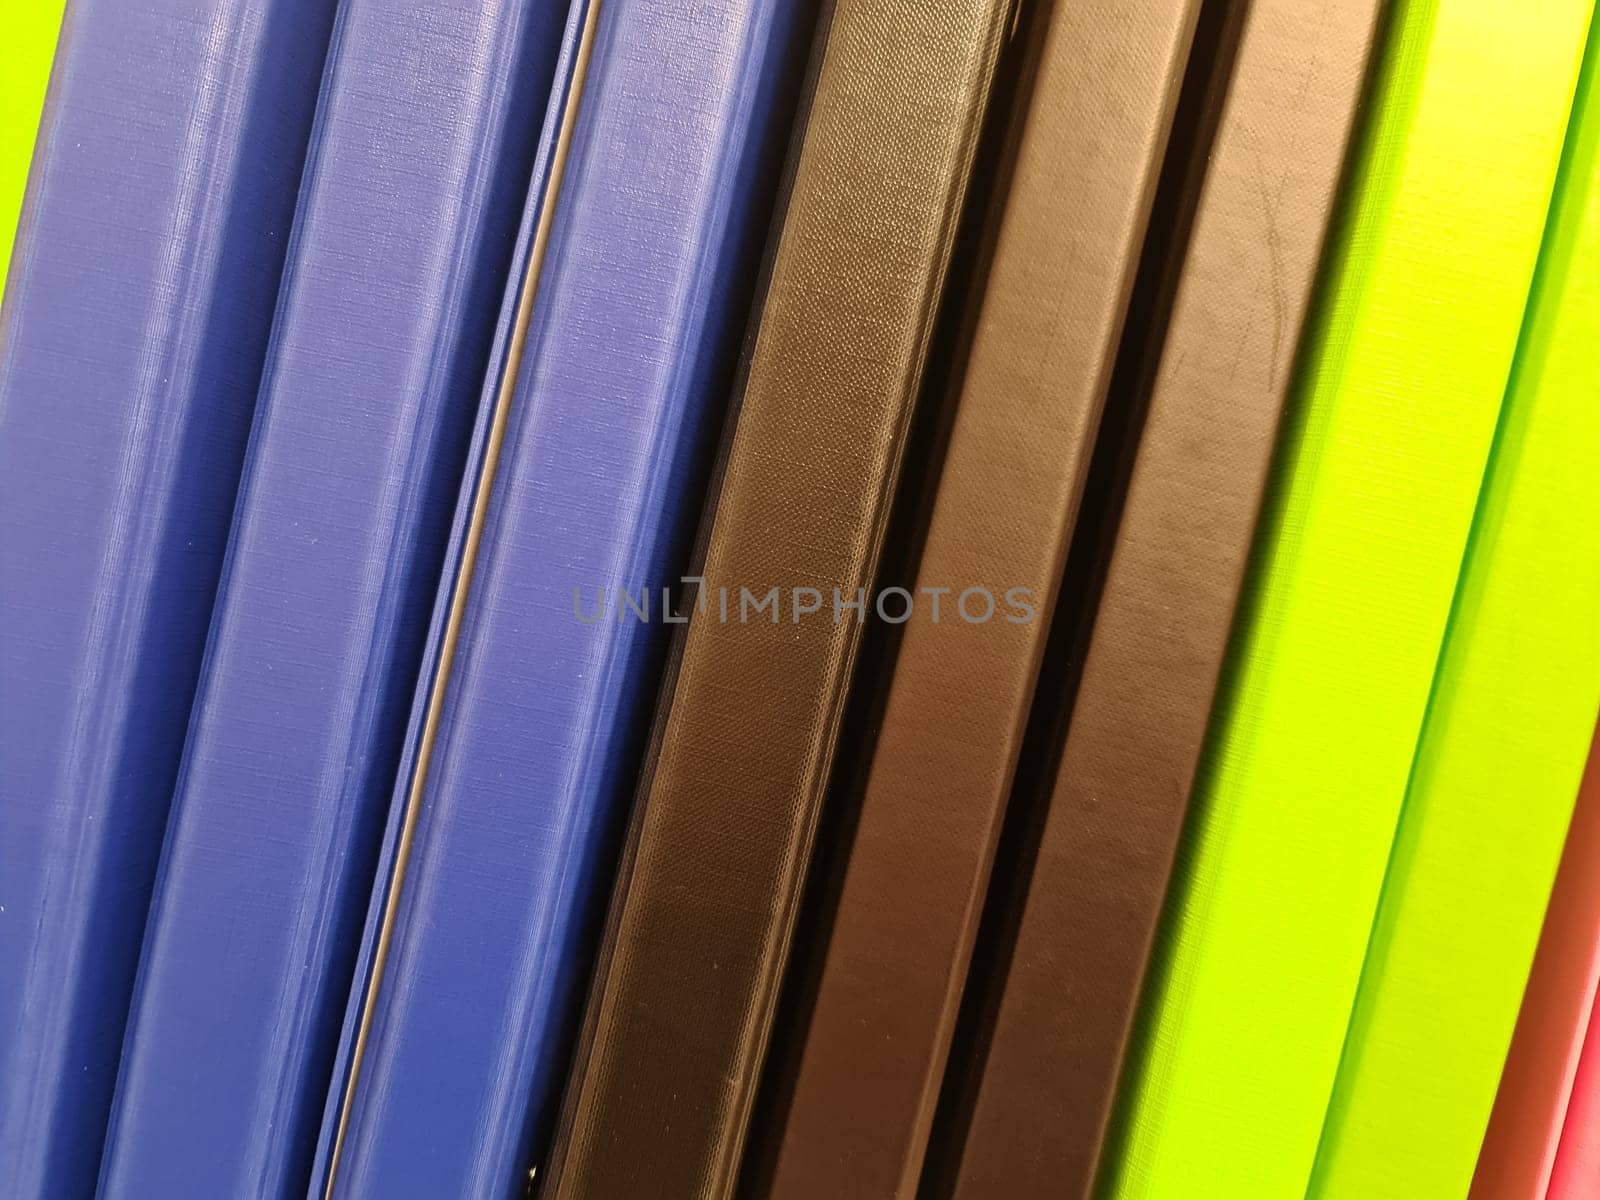 View of coloful plastic surfaces. by MP_foto71